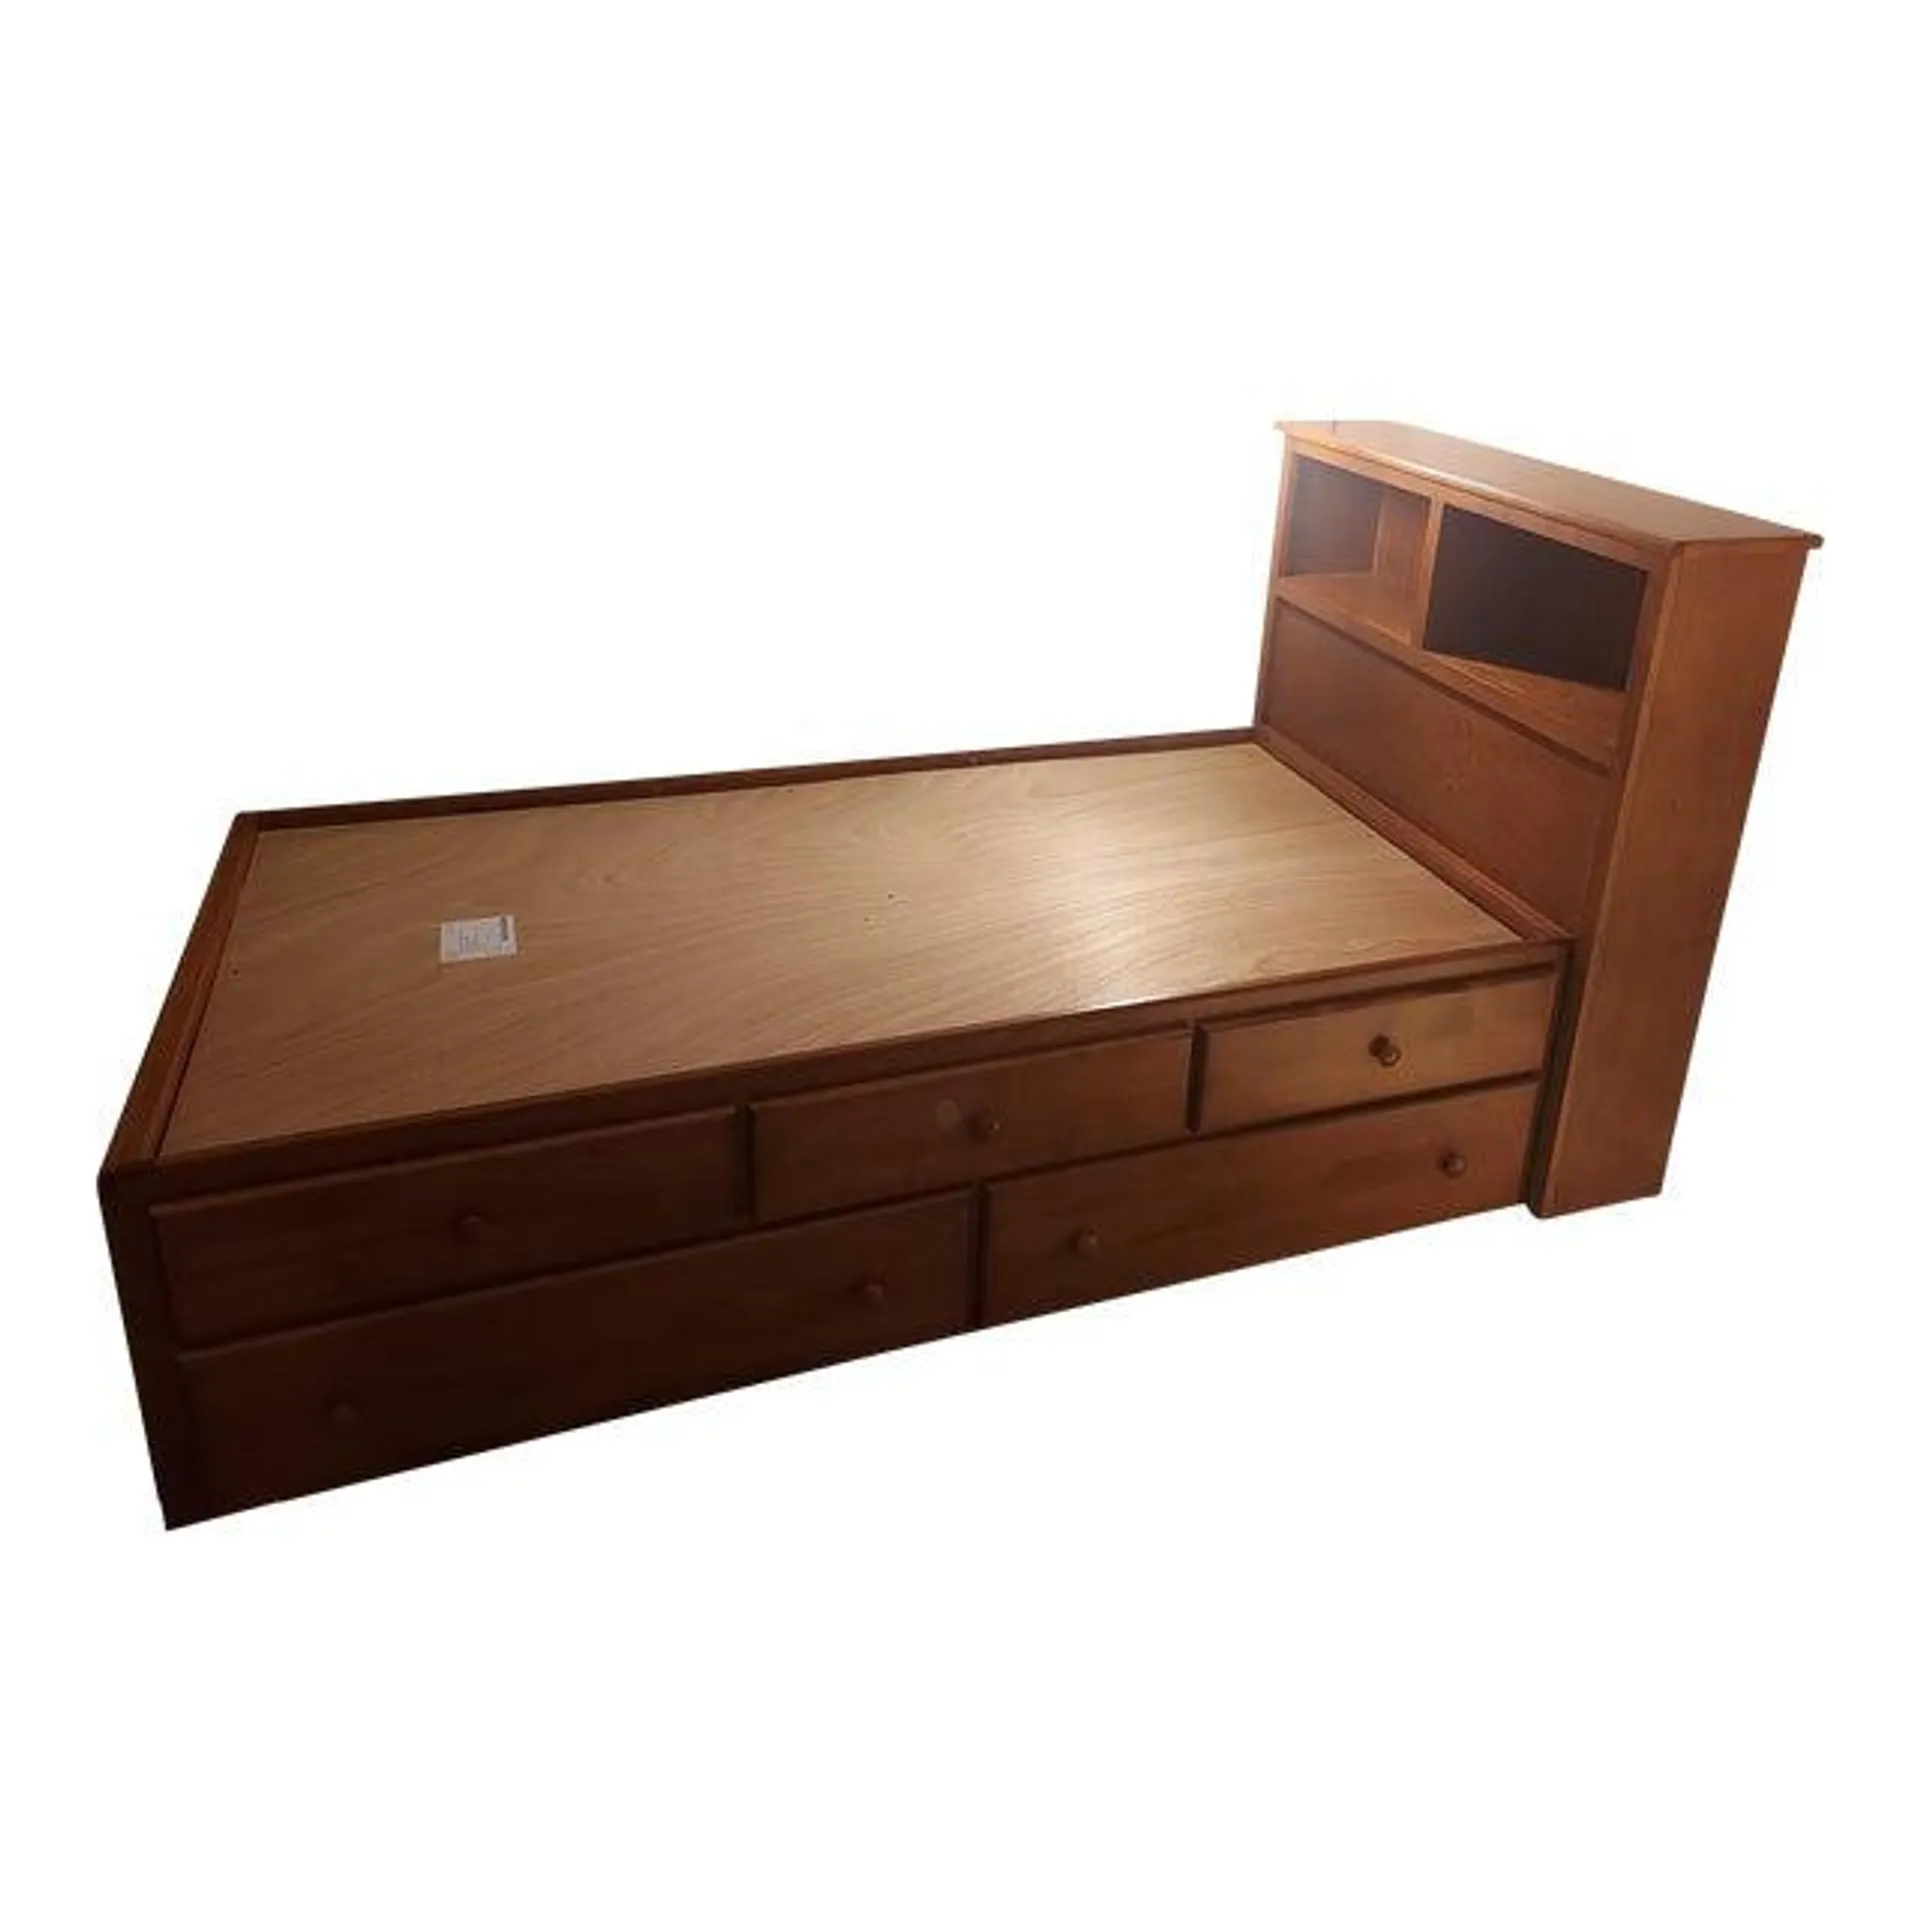 2010 Solid Birch Bedroom Source Twin Size Captain's Storage Bed With Bookcase Headboard